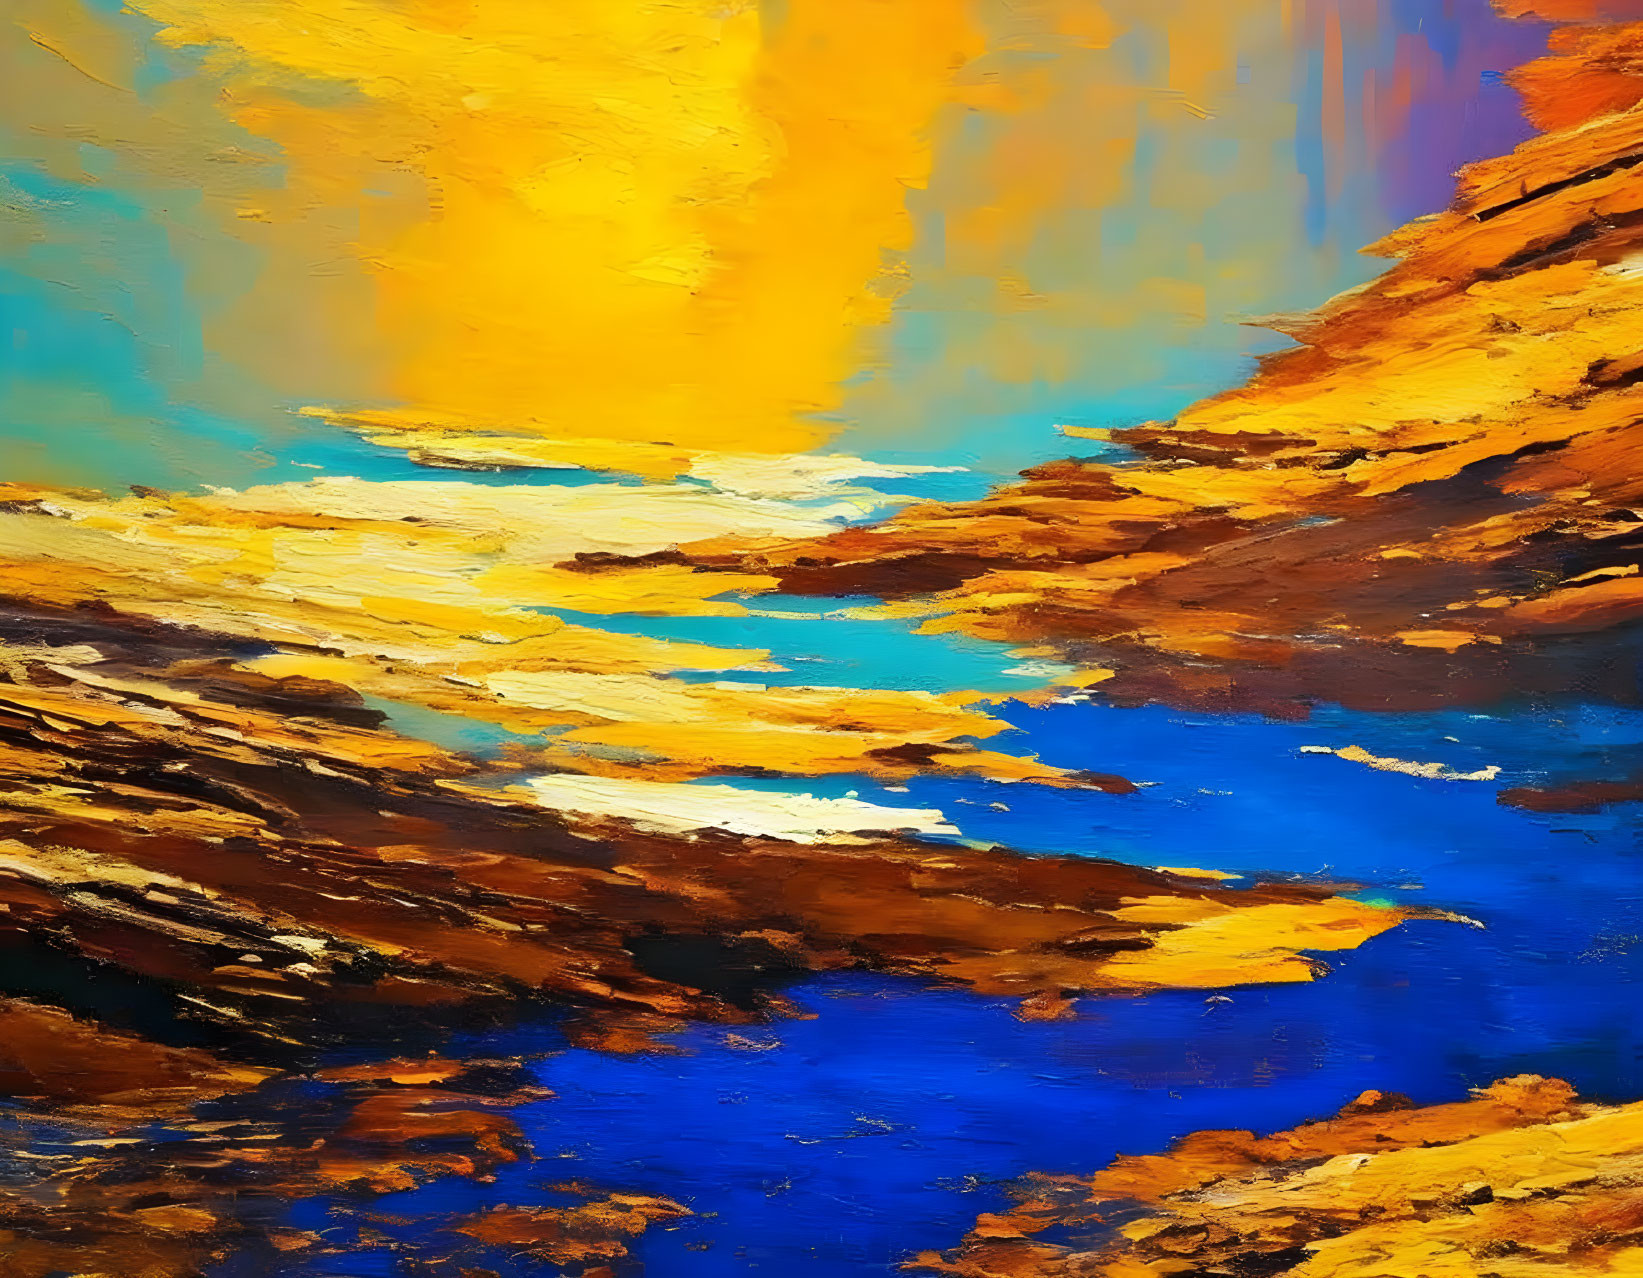 Colorful Abstract Painting: Blue Water with Yellow and Orange Cliff Textures